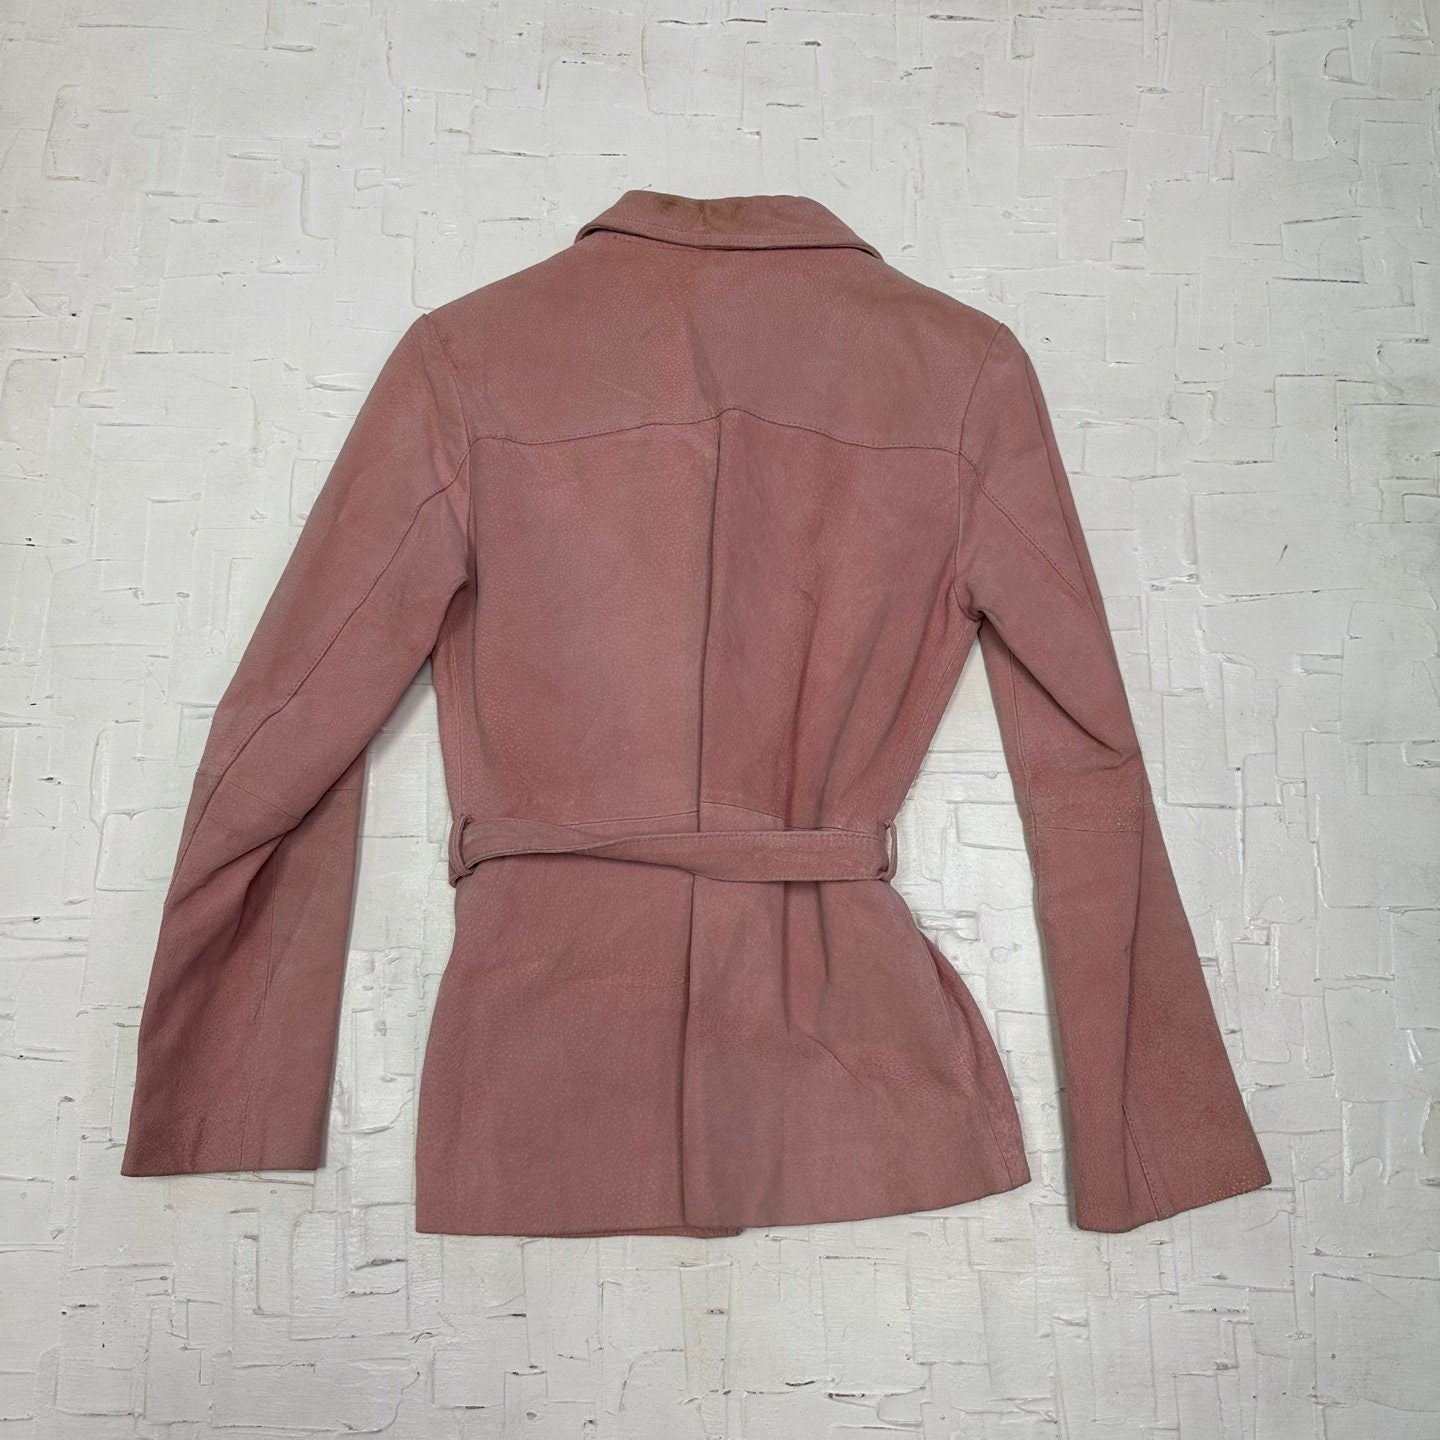 Vintage Pink Leather Suede Blazer with Belt Detail, Button Up Closure and Lapel Collar | Vintage Leather Blazer | Size M | SKU ST-2048 |